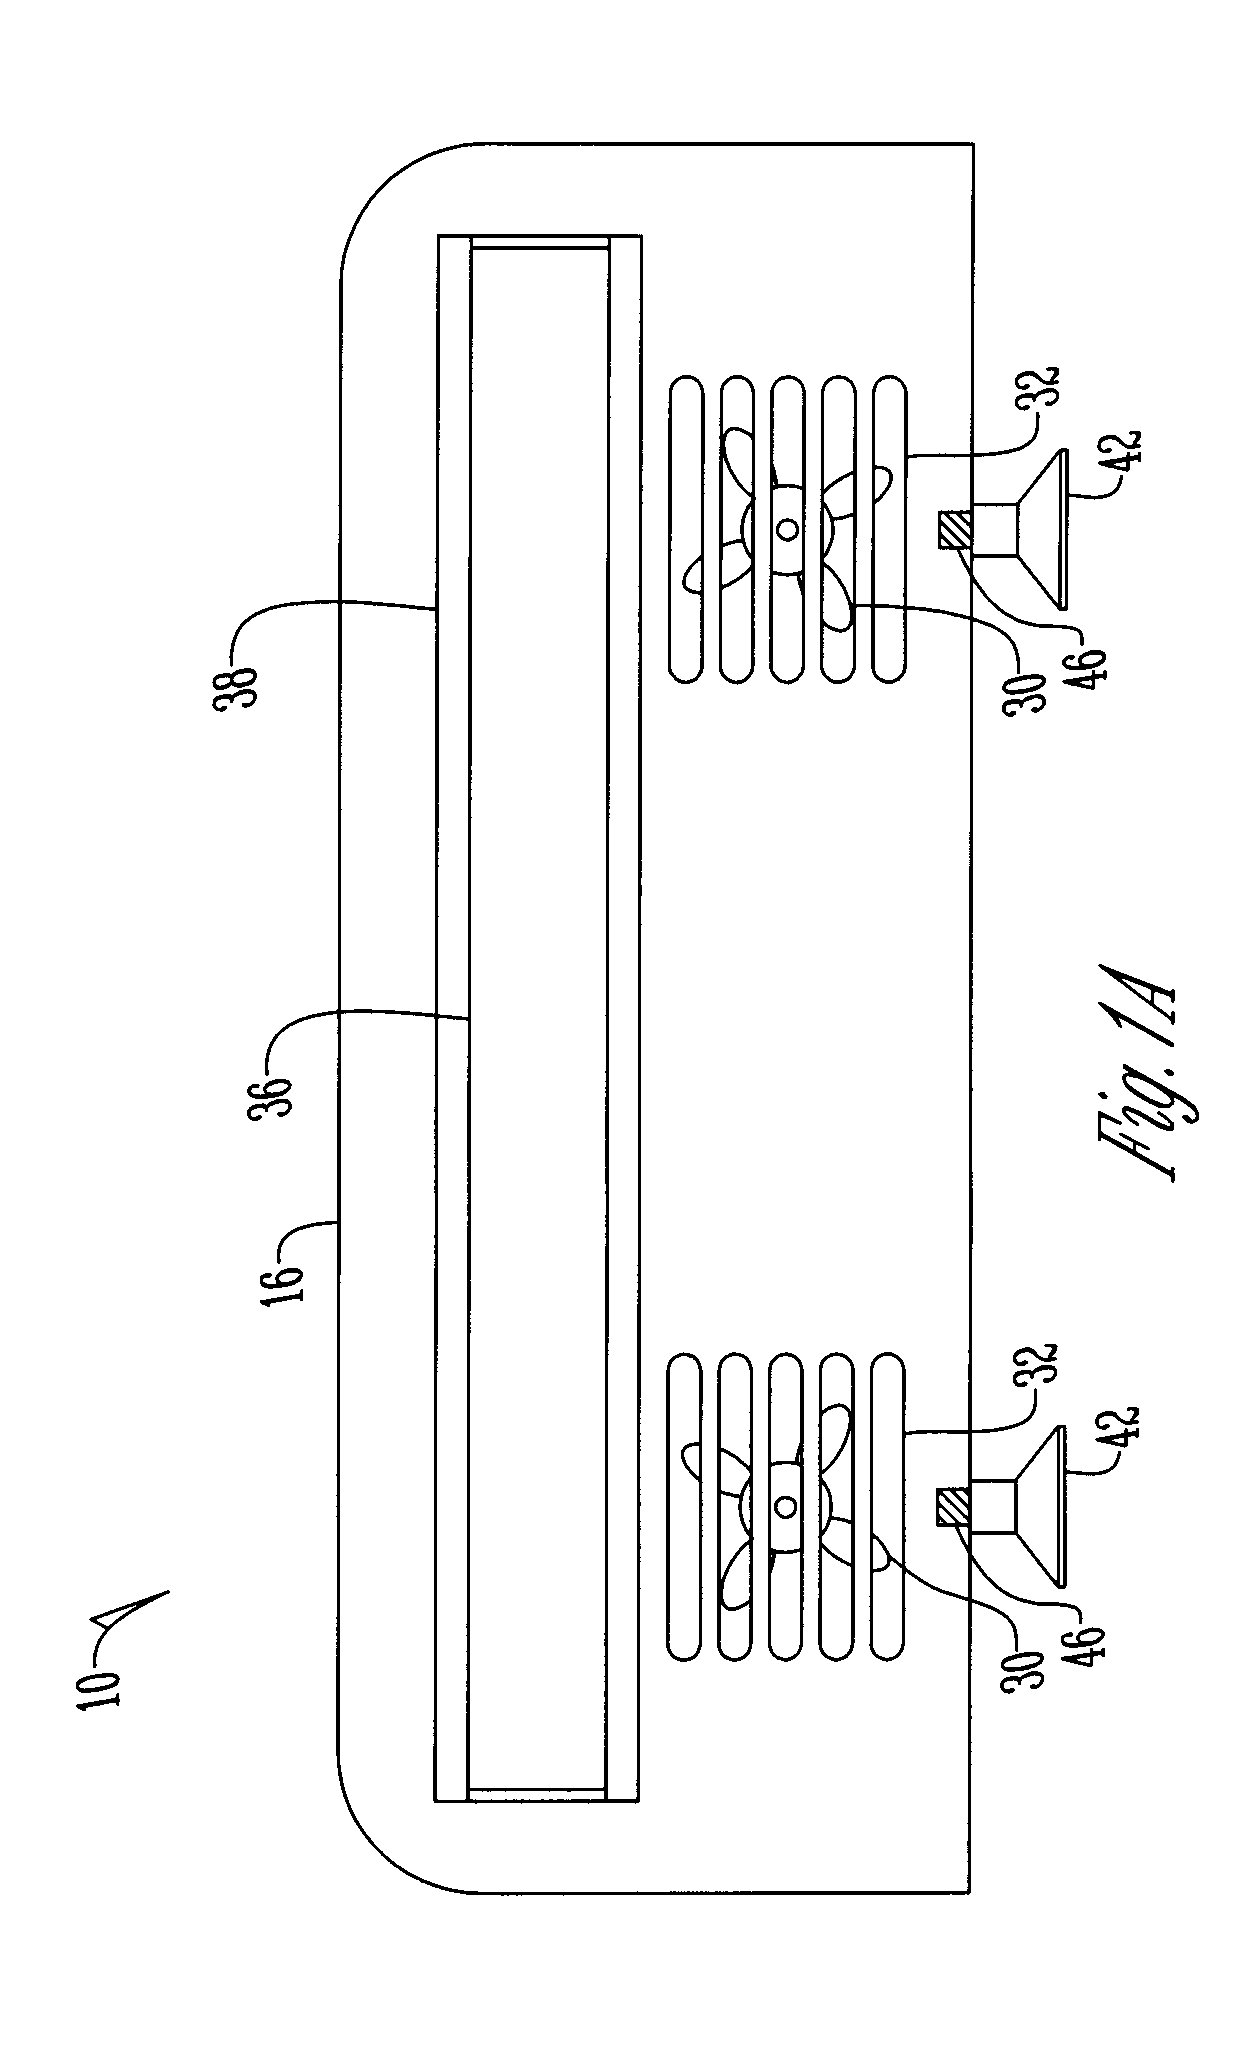 Holding assembly and method of use